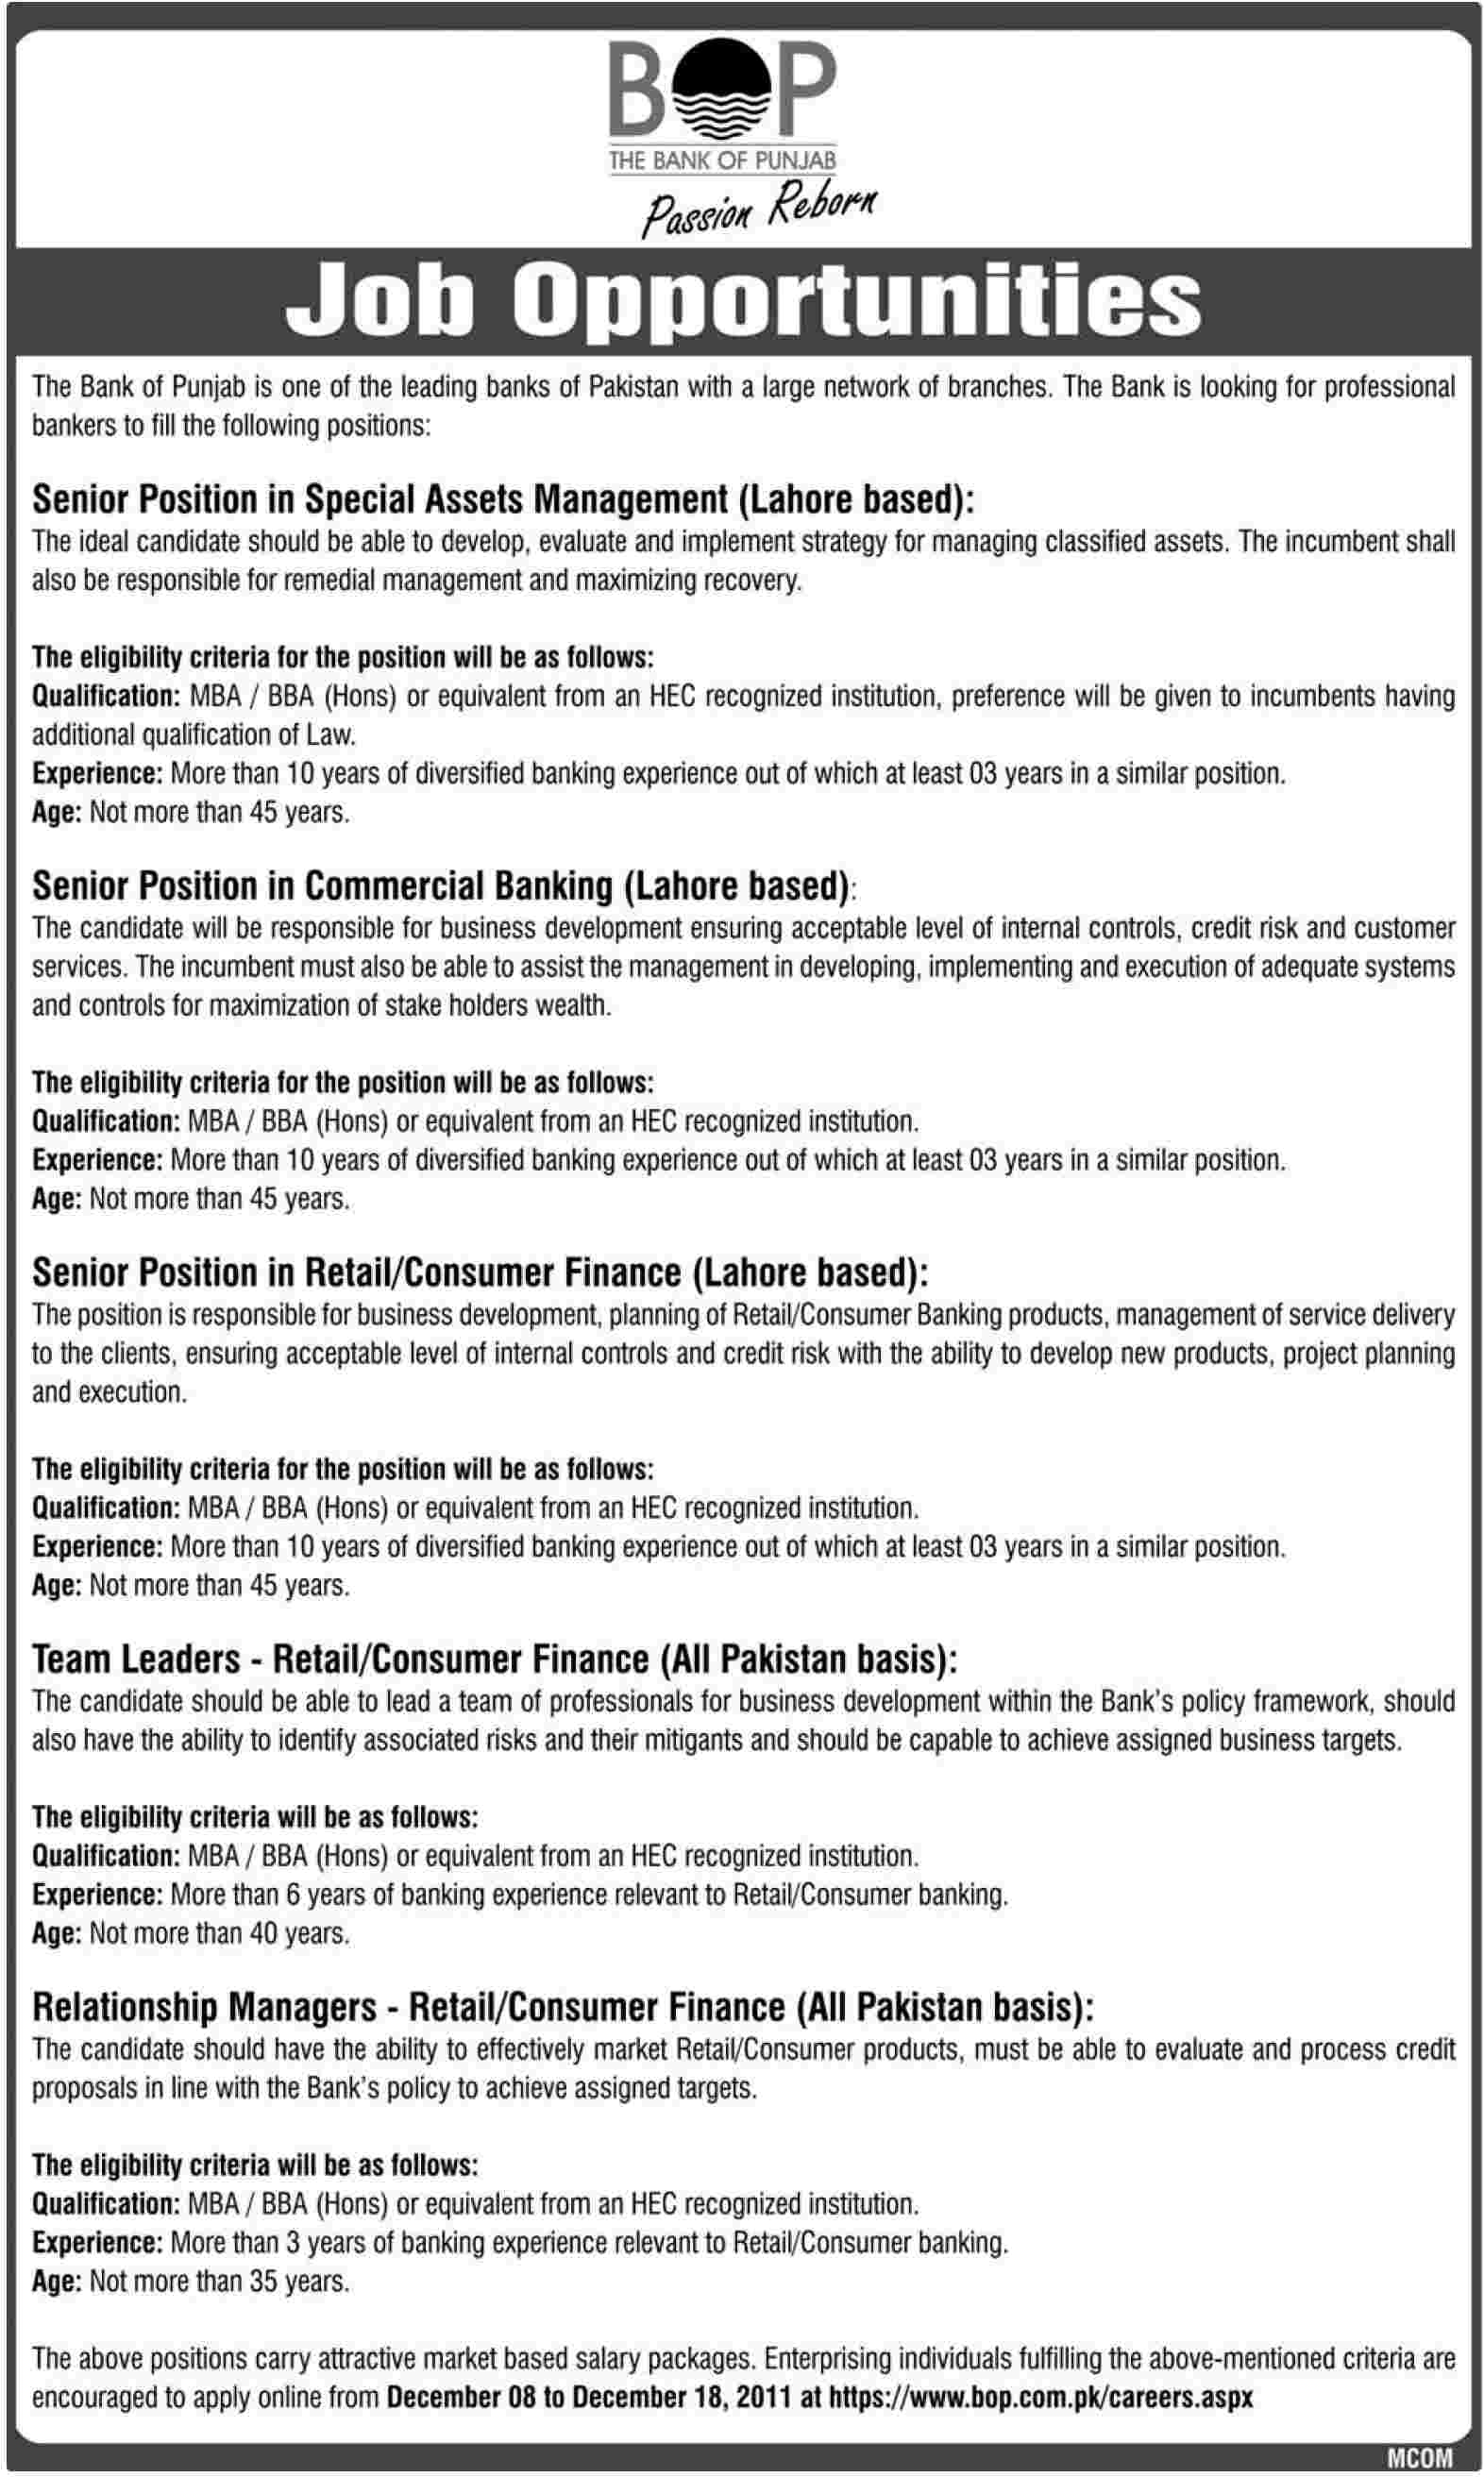 The Bank of Punjab Job Opportunities